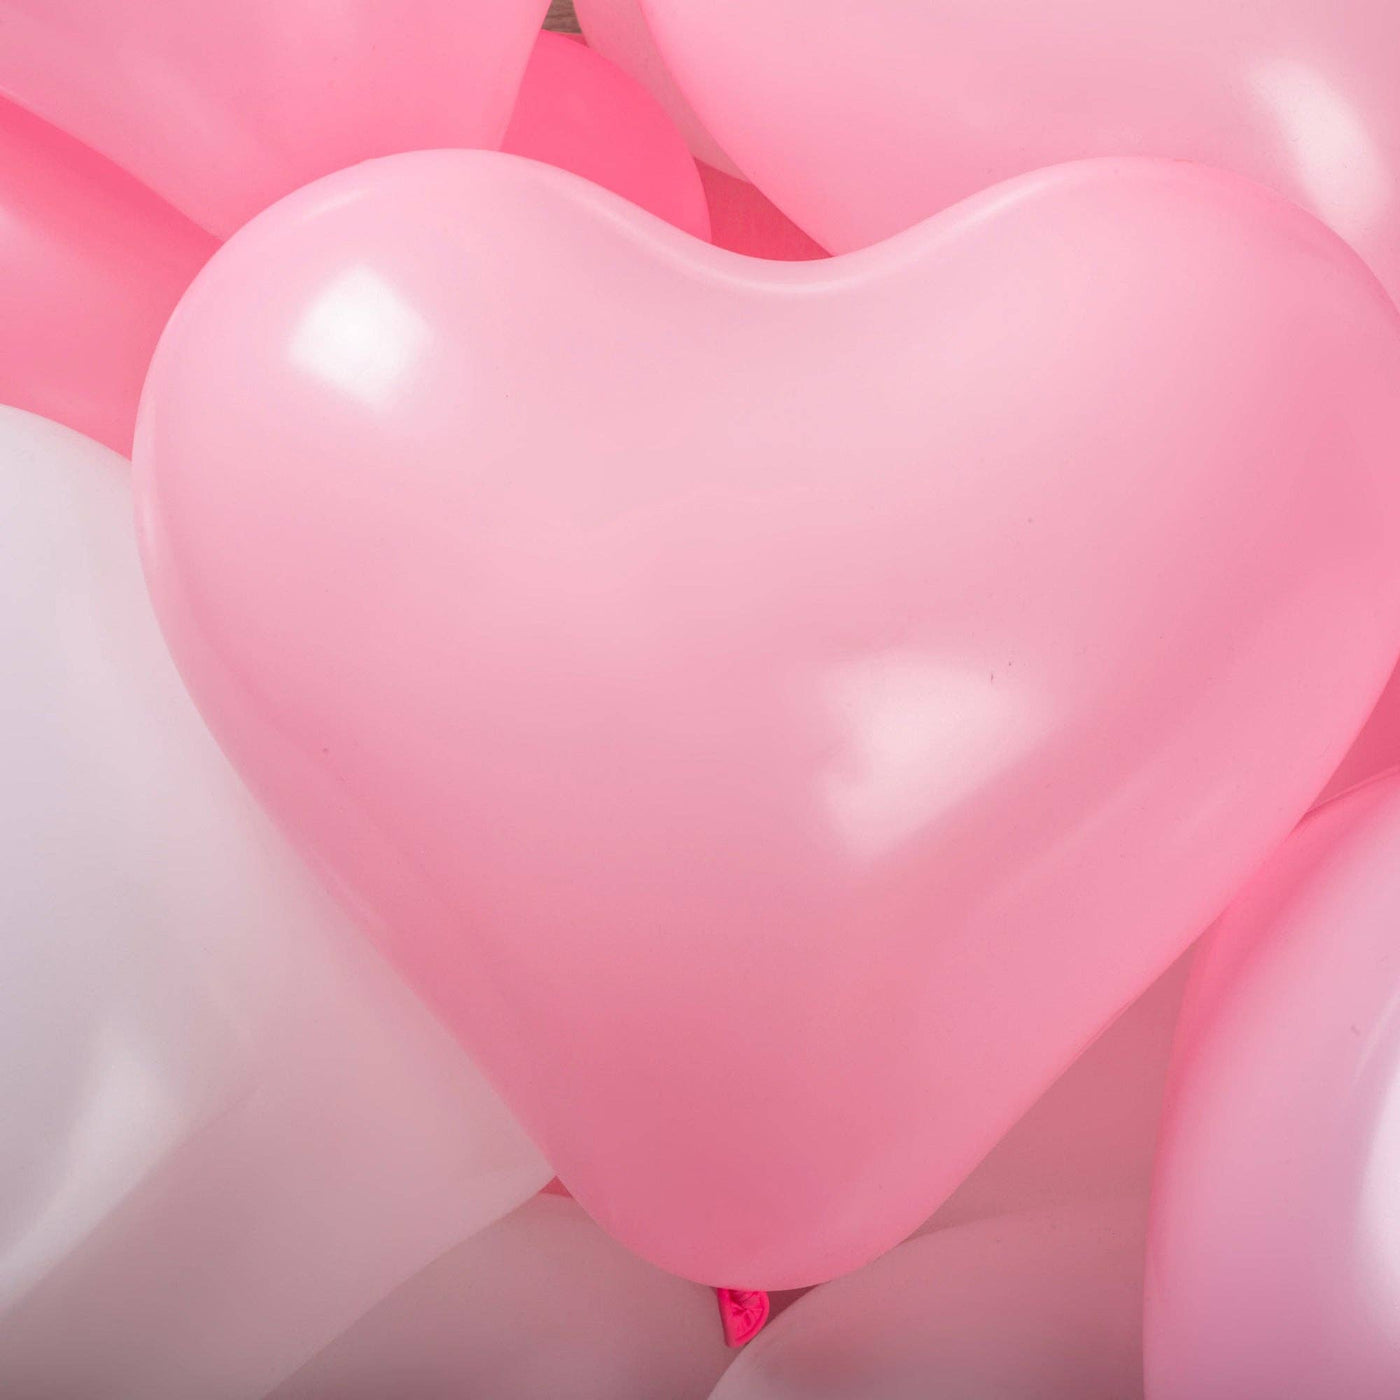 Heart Shaped Valentine's Balloon Bouquet with Helium